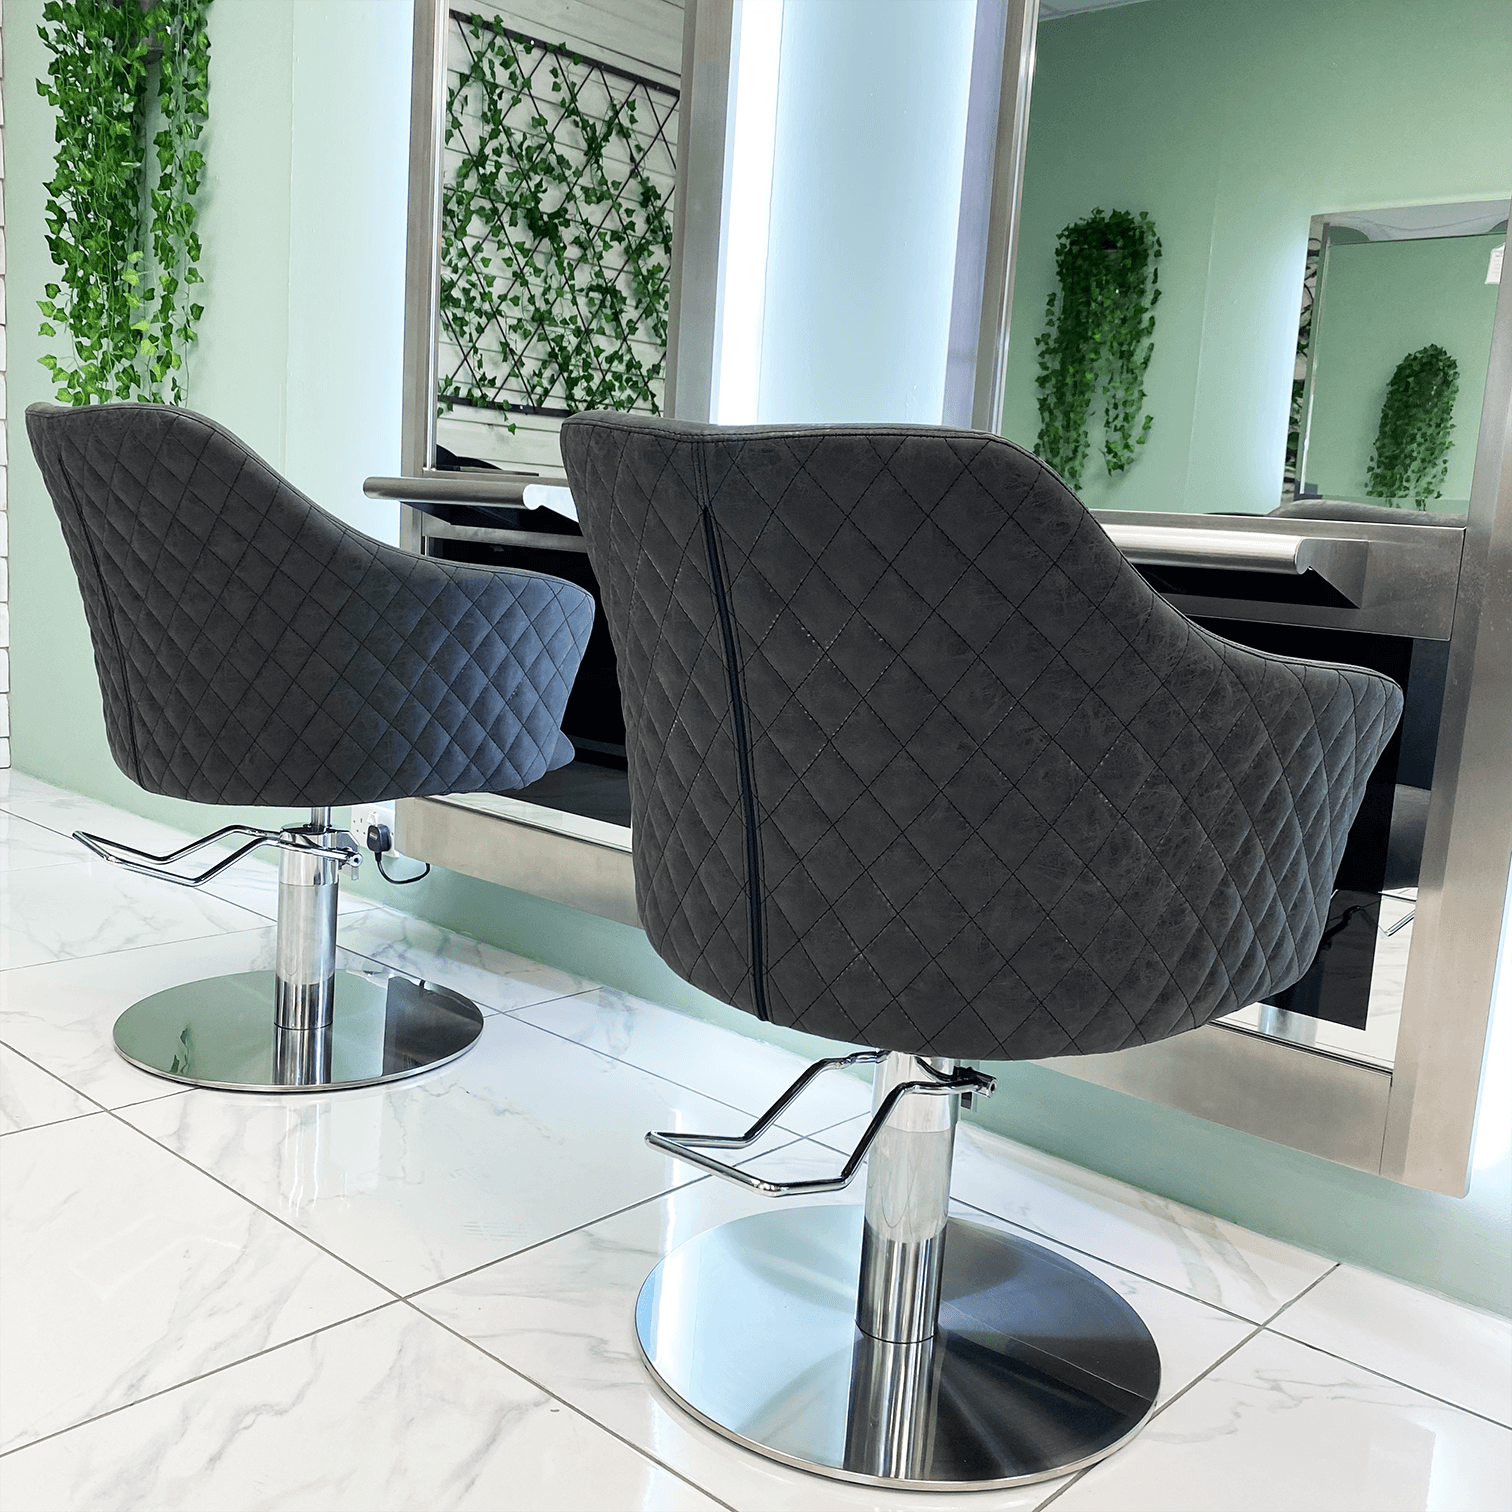 The Hampton Salon Styling Chair - Charcoal by SEC